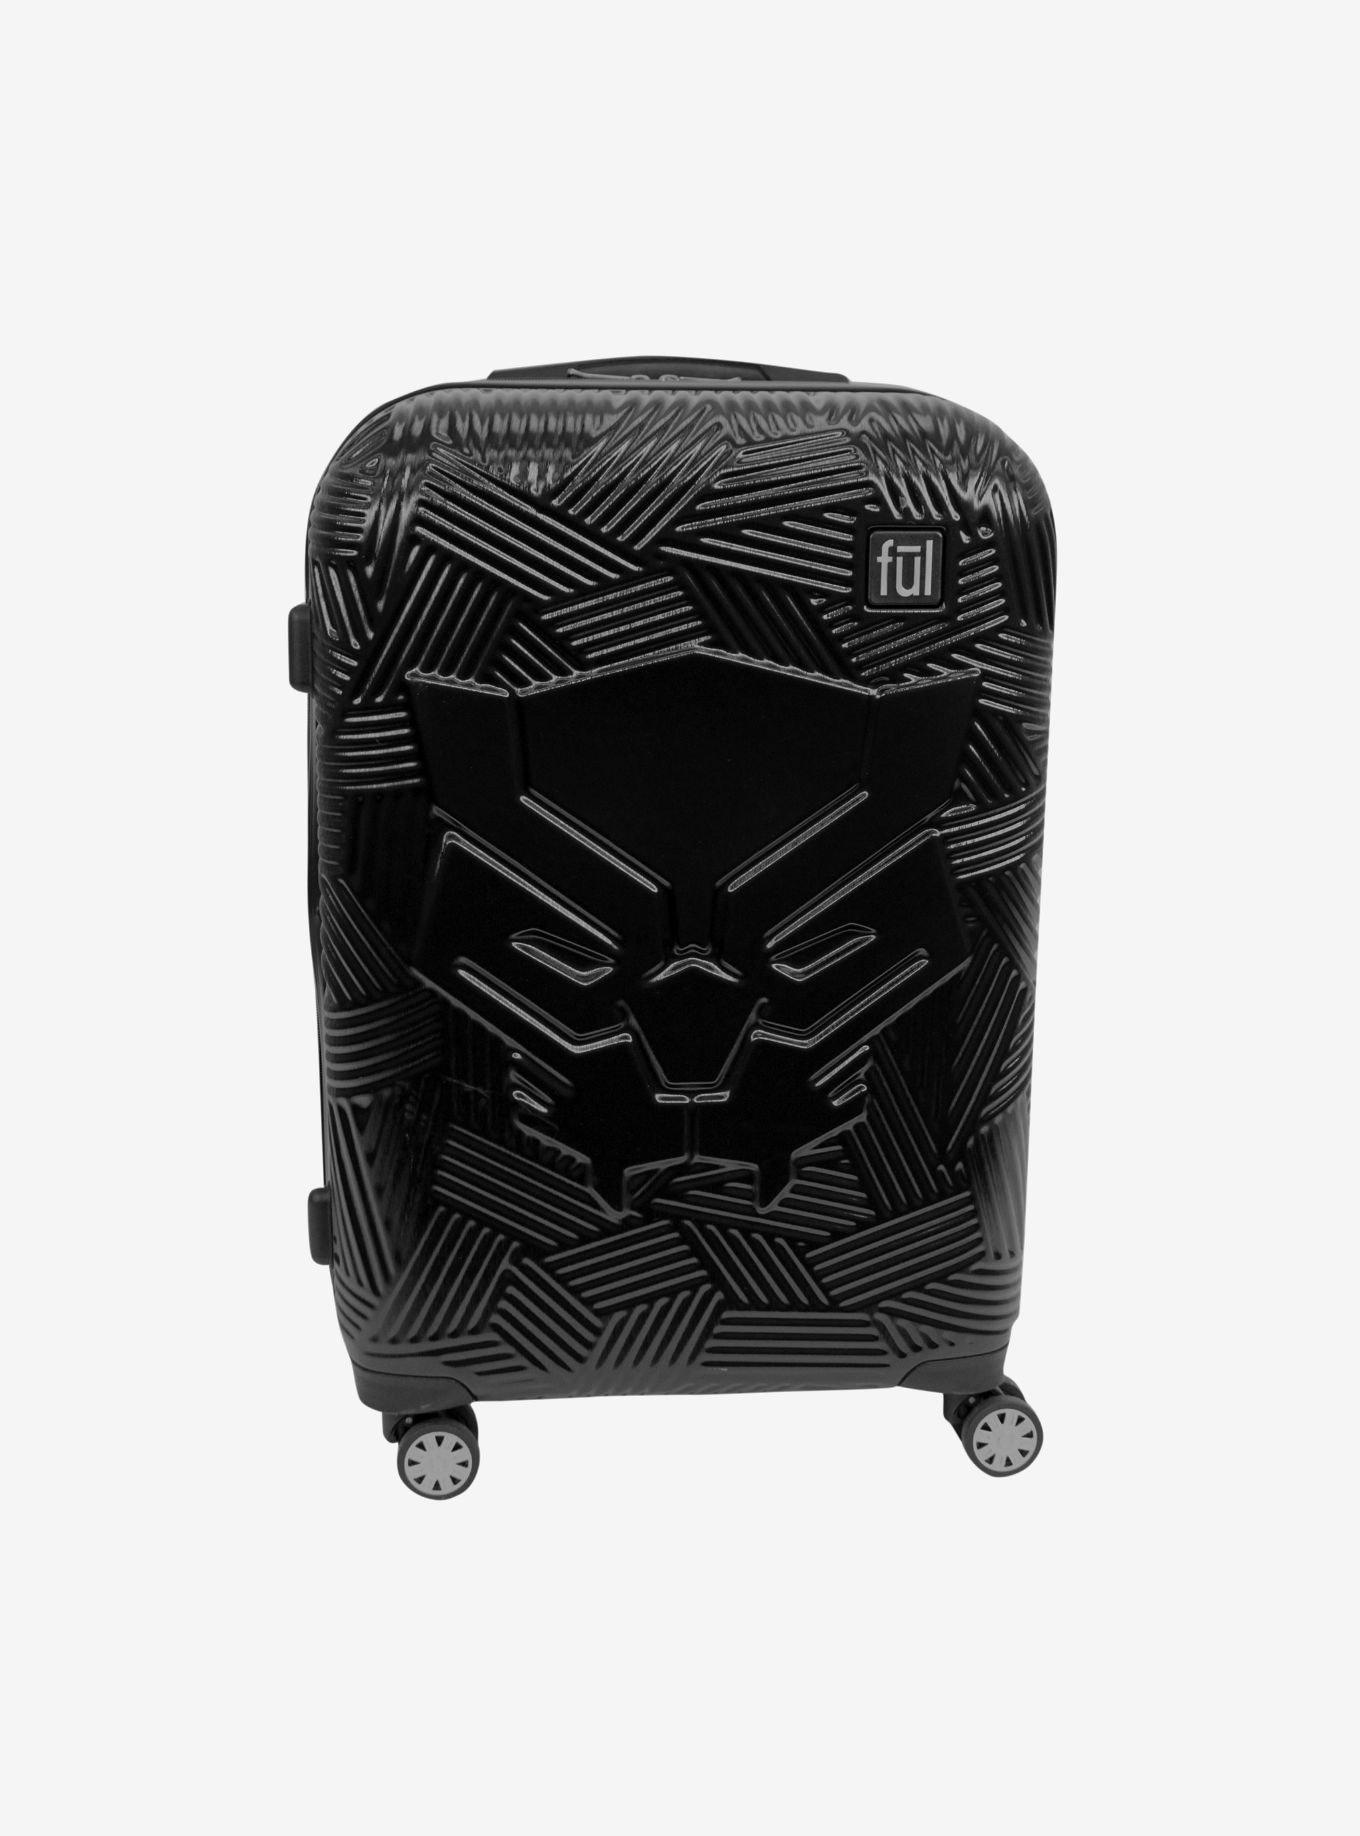 FUL Marvel Black Panther Icon Molded Hard Sided 29 Inch Rolling Luggage, , hi-res